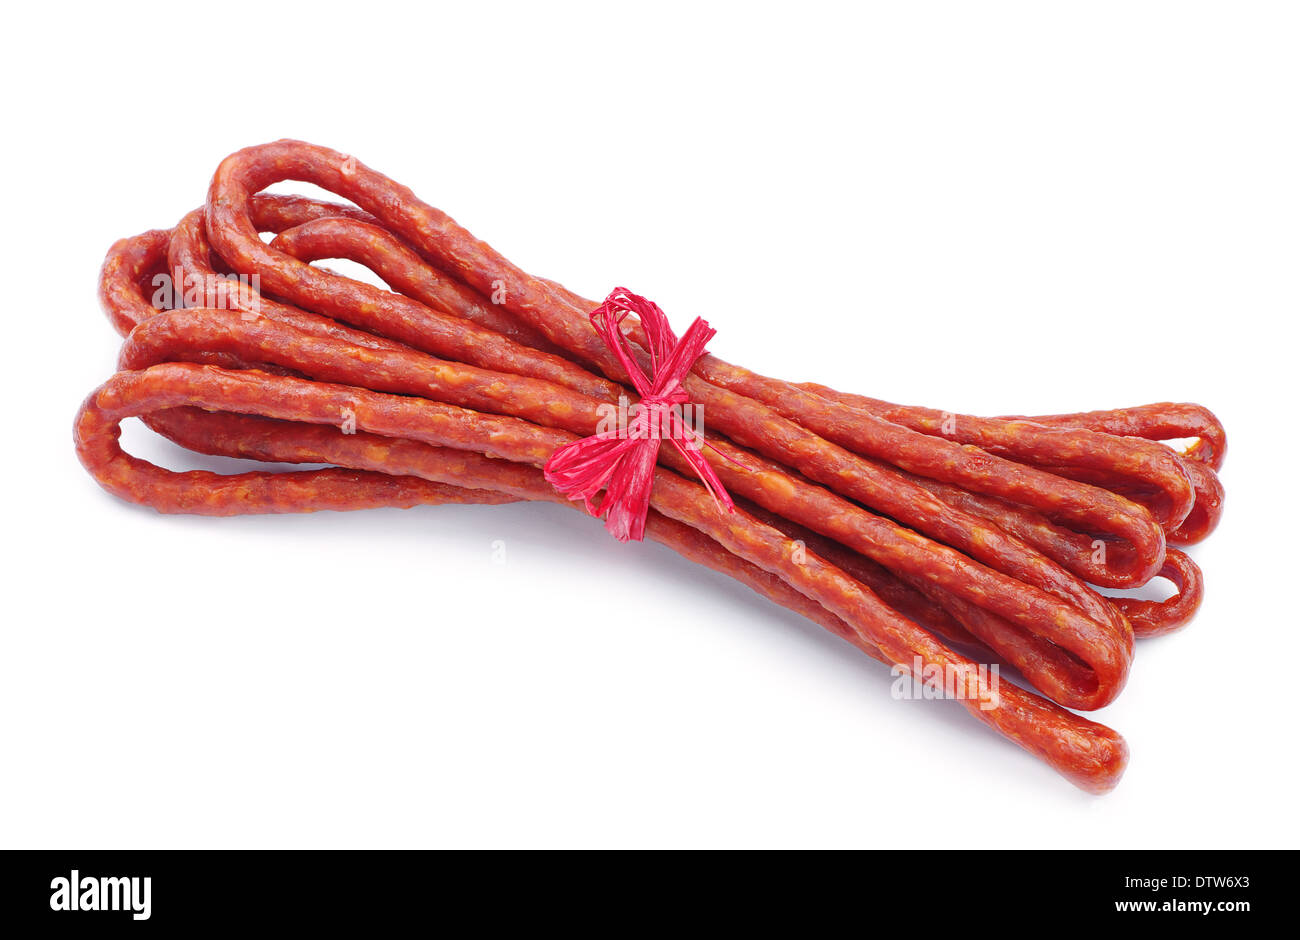 Long thin dry sausage on white background Stock Photo